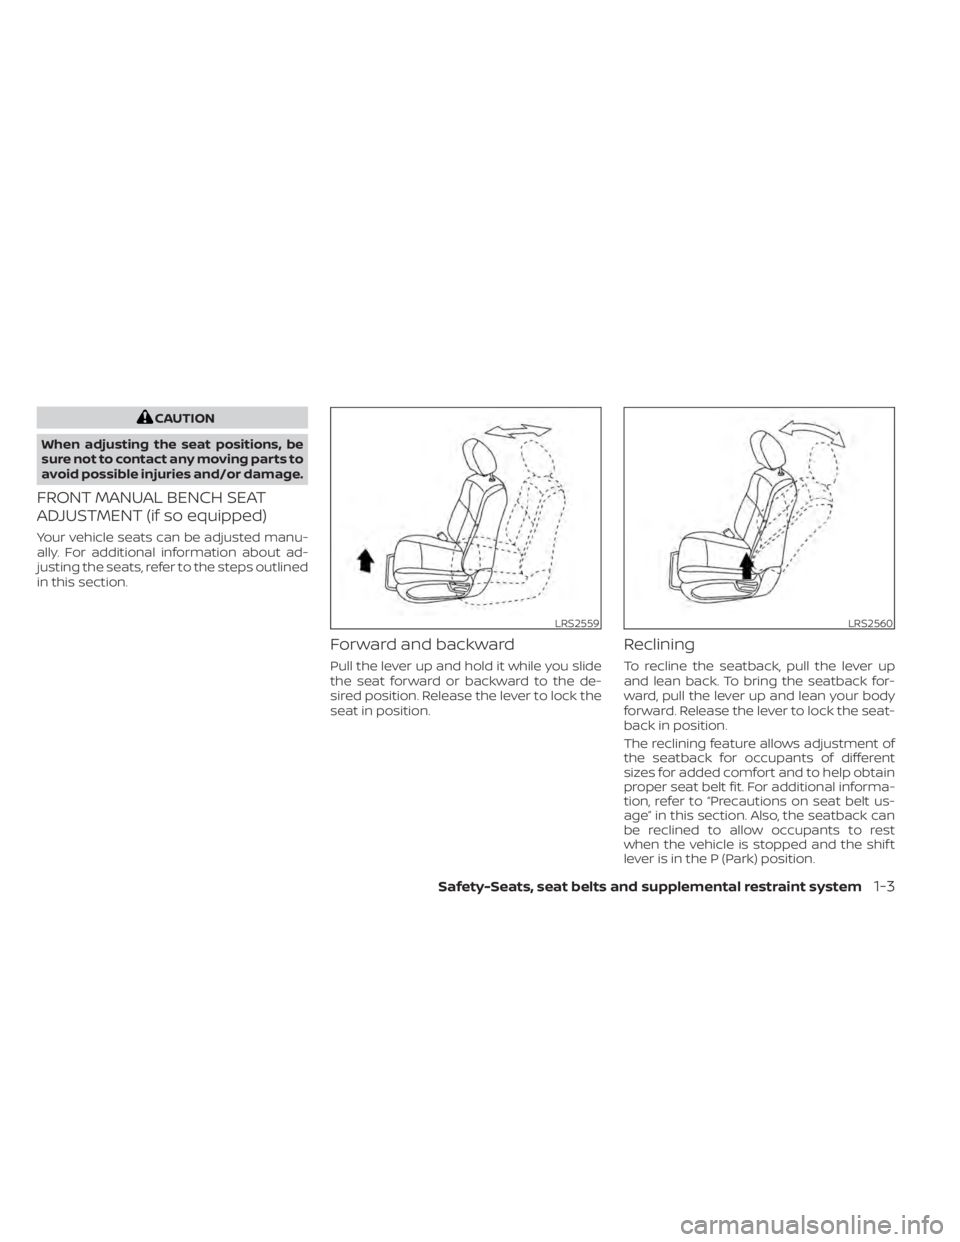 NISSAN TITAN 2020  Owner´s Manual CAUTION
When adjusting the seat positions, be
sure not to contact any moving parts to
avoid possible injuries and/or damage.
FRONT MANUAL BENCH SEAT
ADJUSTMENT (if so equipped)
Your vehicle seats can 